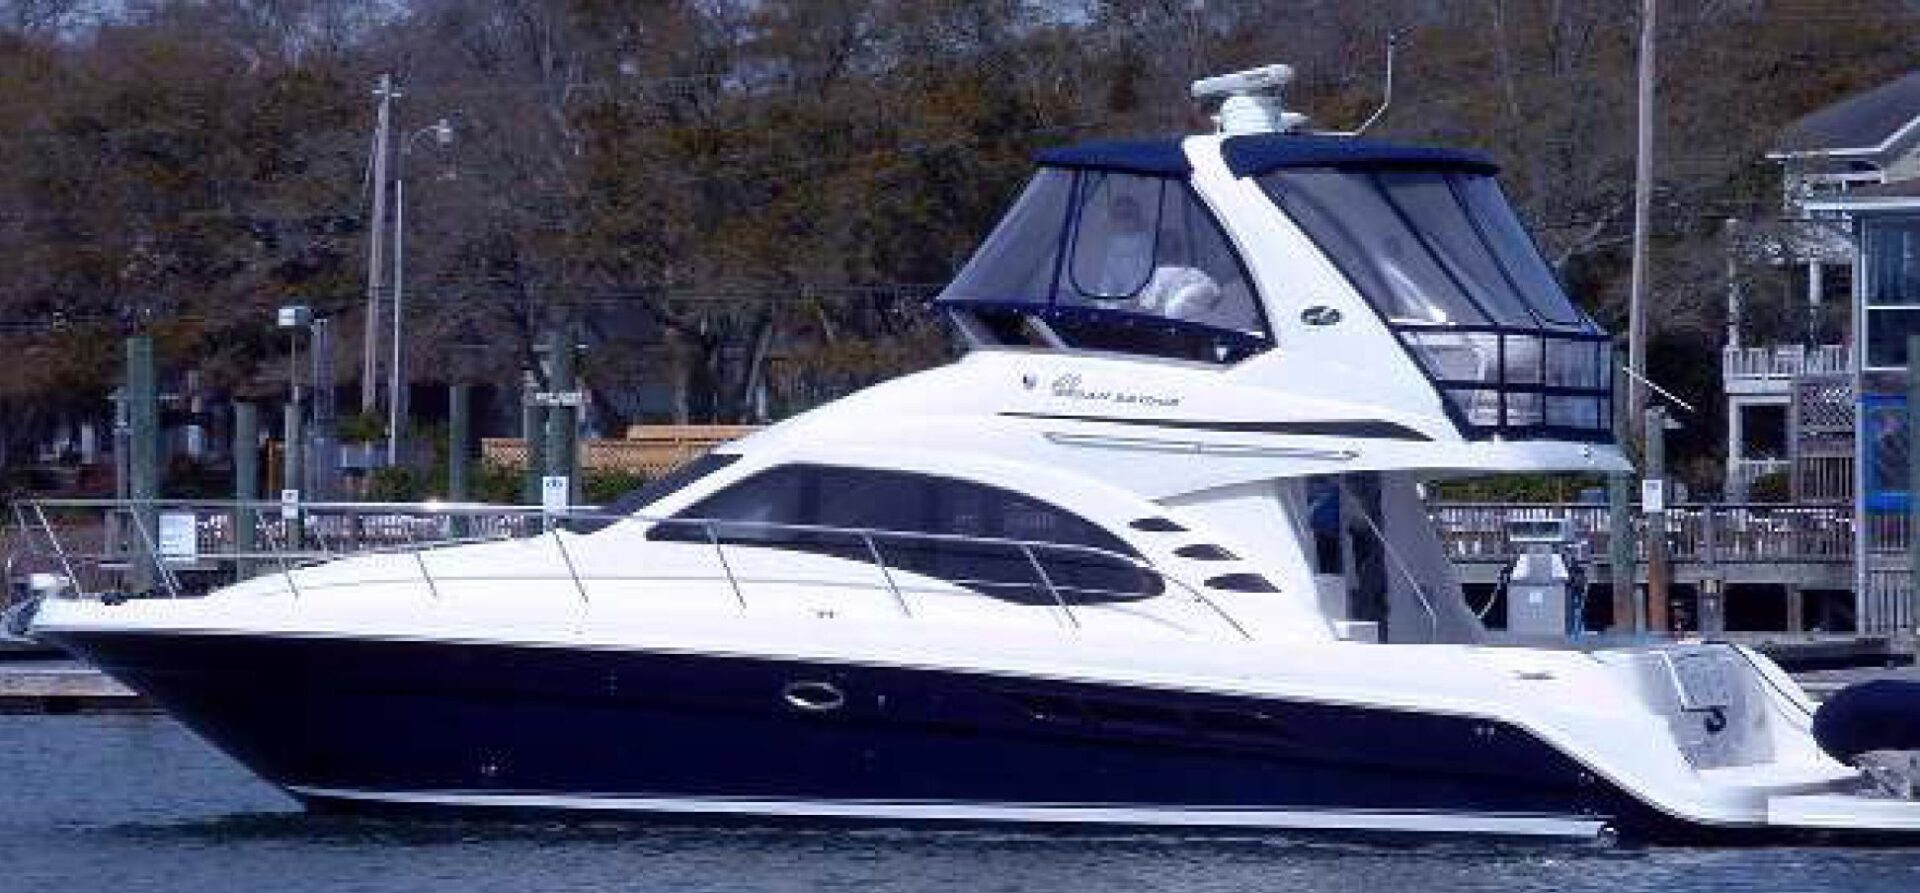 A South Bend 44 Seeray yacht